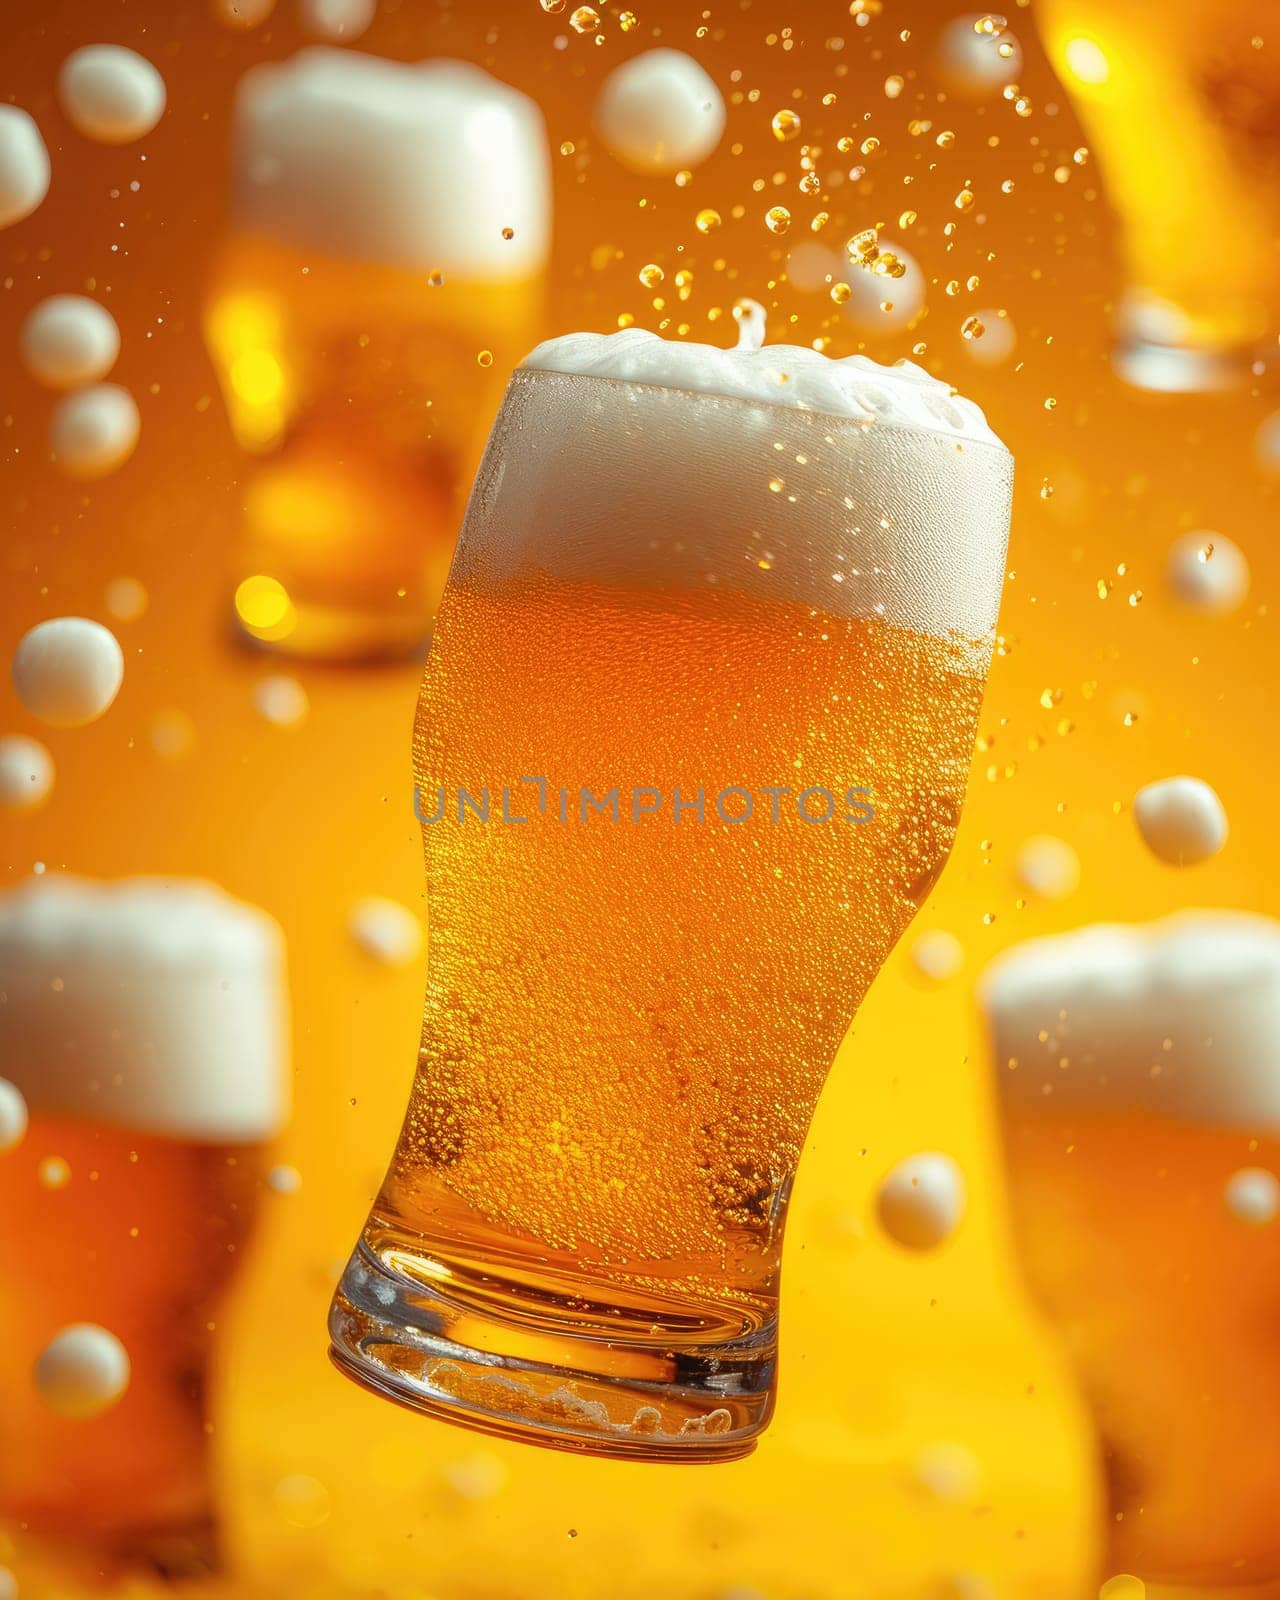 Flying glasses of beer on bright yellow background background by Yurich32